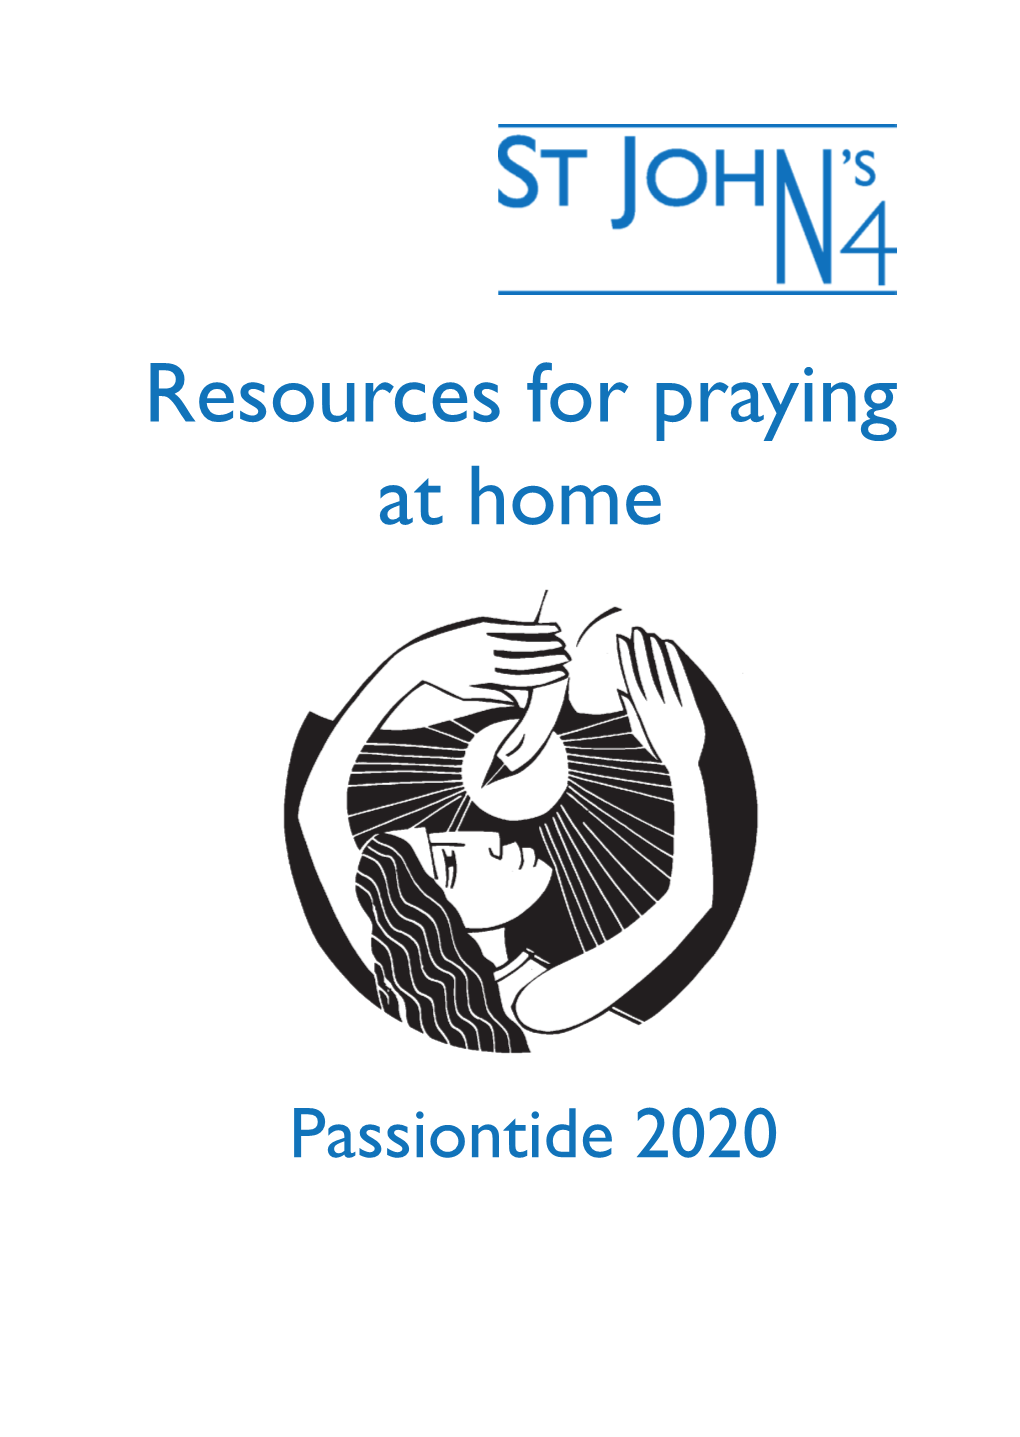 Resources for Praying at Home